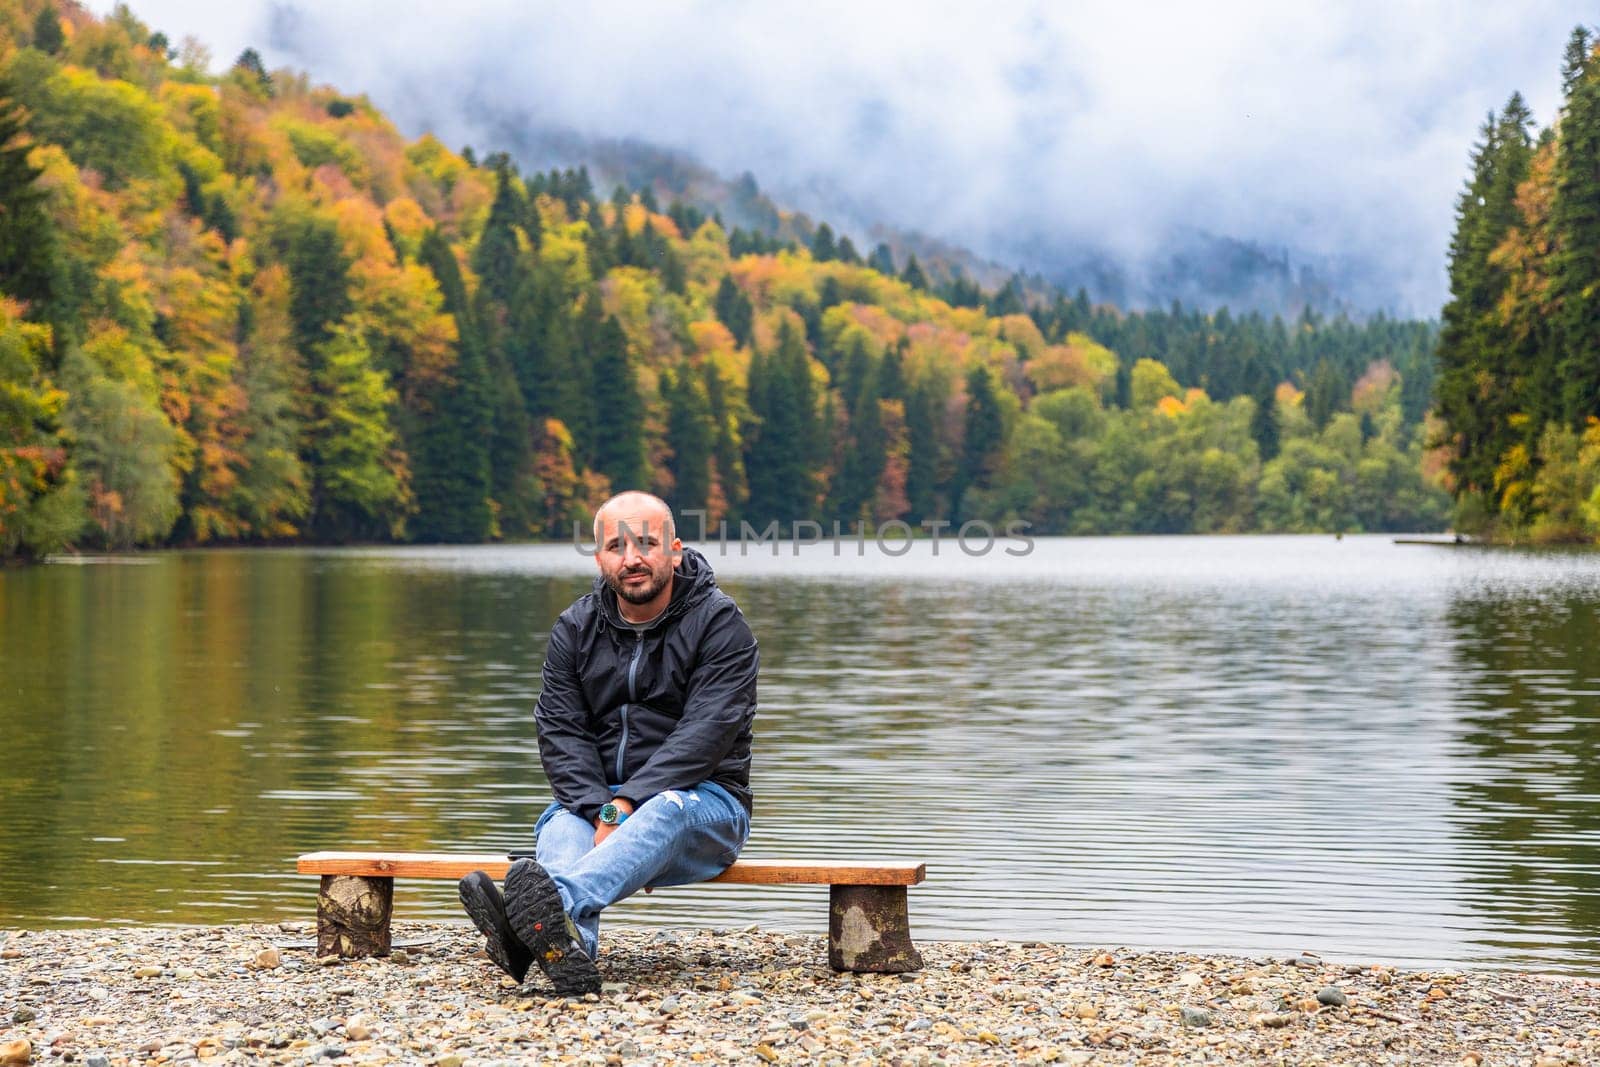 A man admires the picturesque scenery by the lake in the mountains, enjoying the tranquility and beauty of nature.